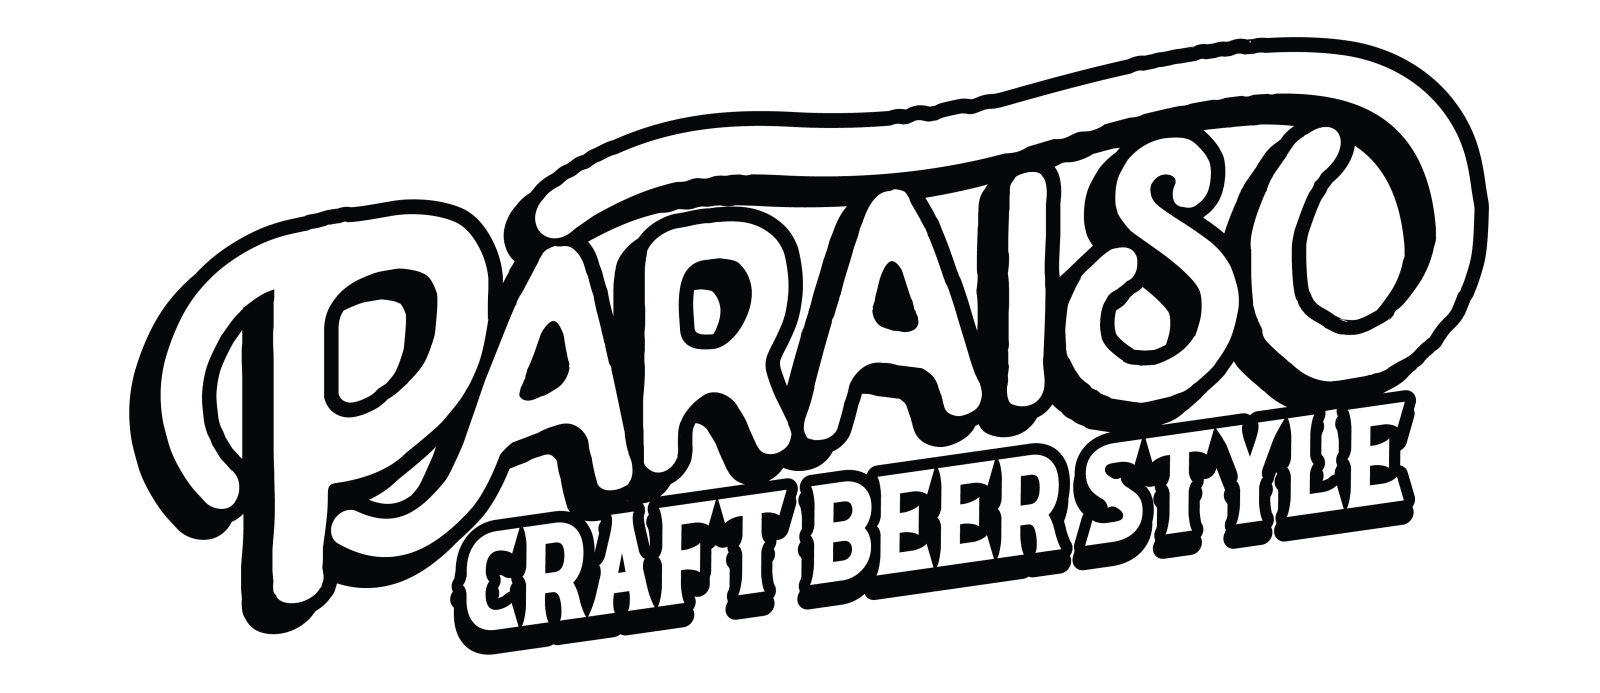 Paraiso craft beer style